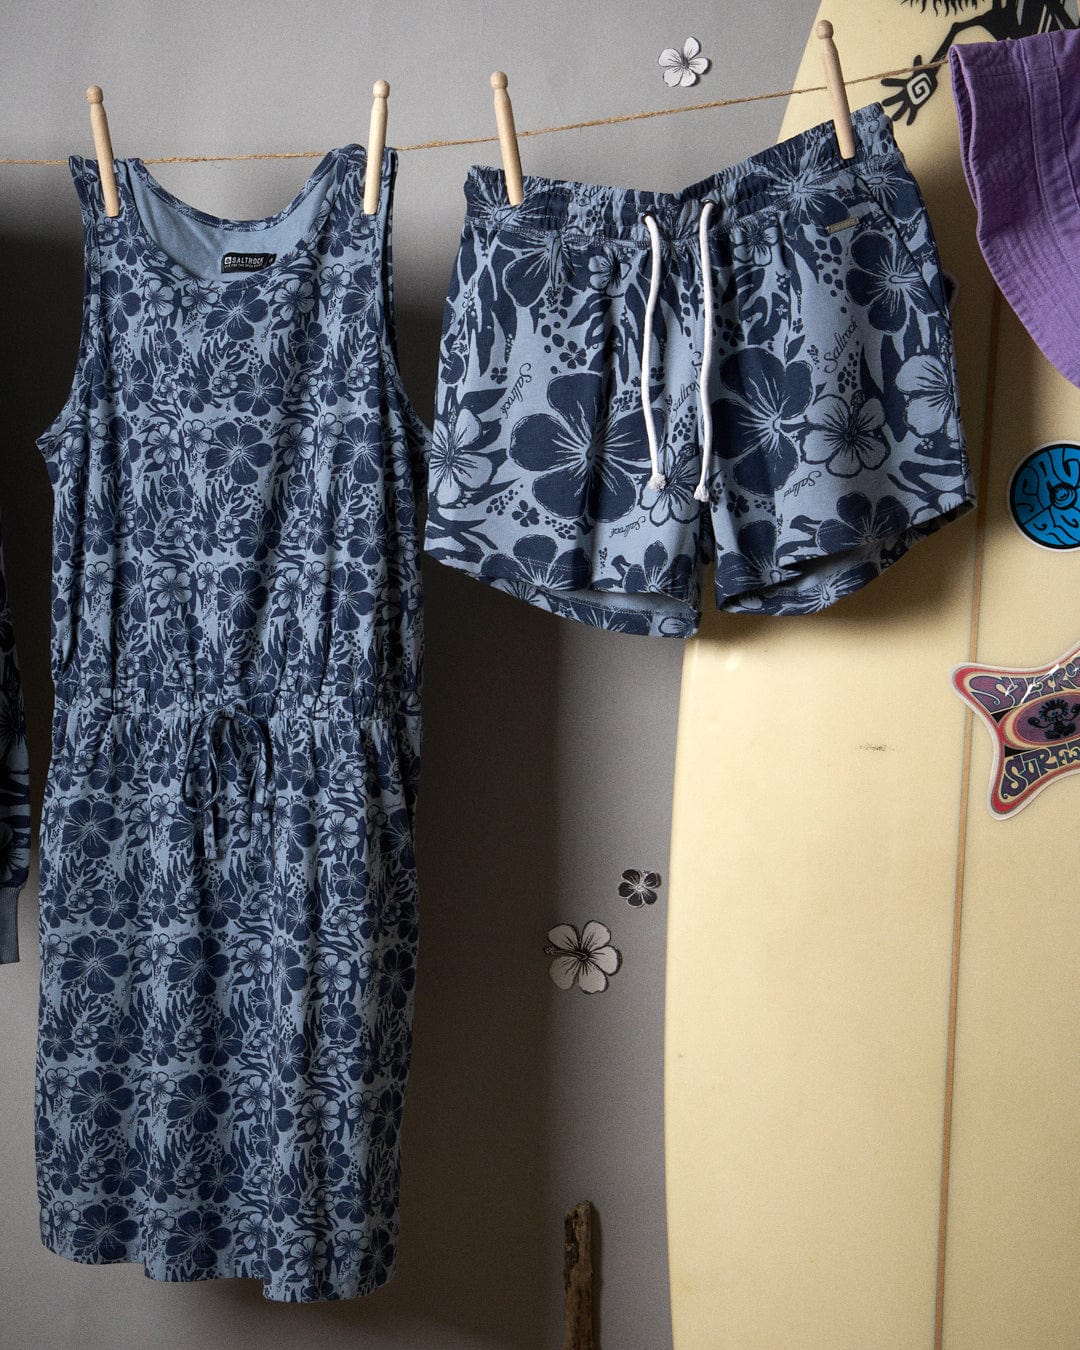 Hibiscus Bauhaus - Womens Midi Dress - Blue dress and shorts hanging on clothespins against a wall, with a surfboard and Hawaiian hibiscus stickers visible on the right side.